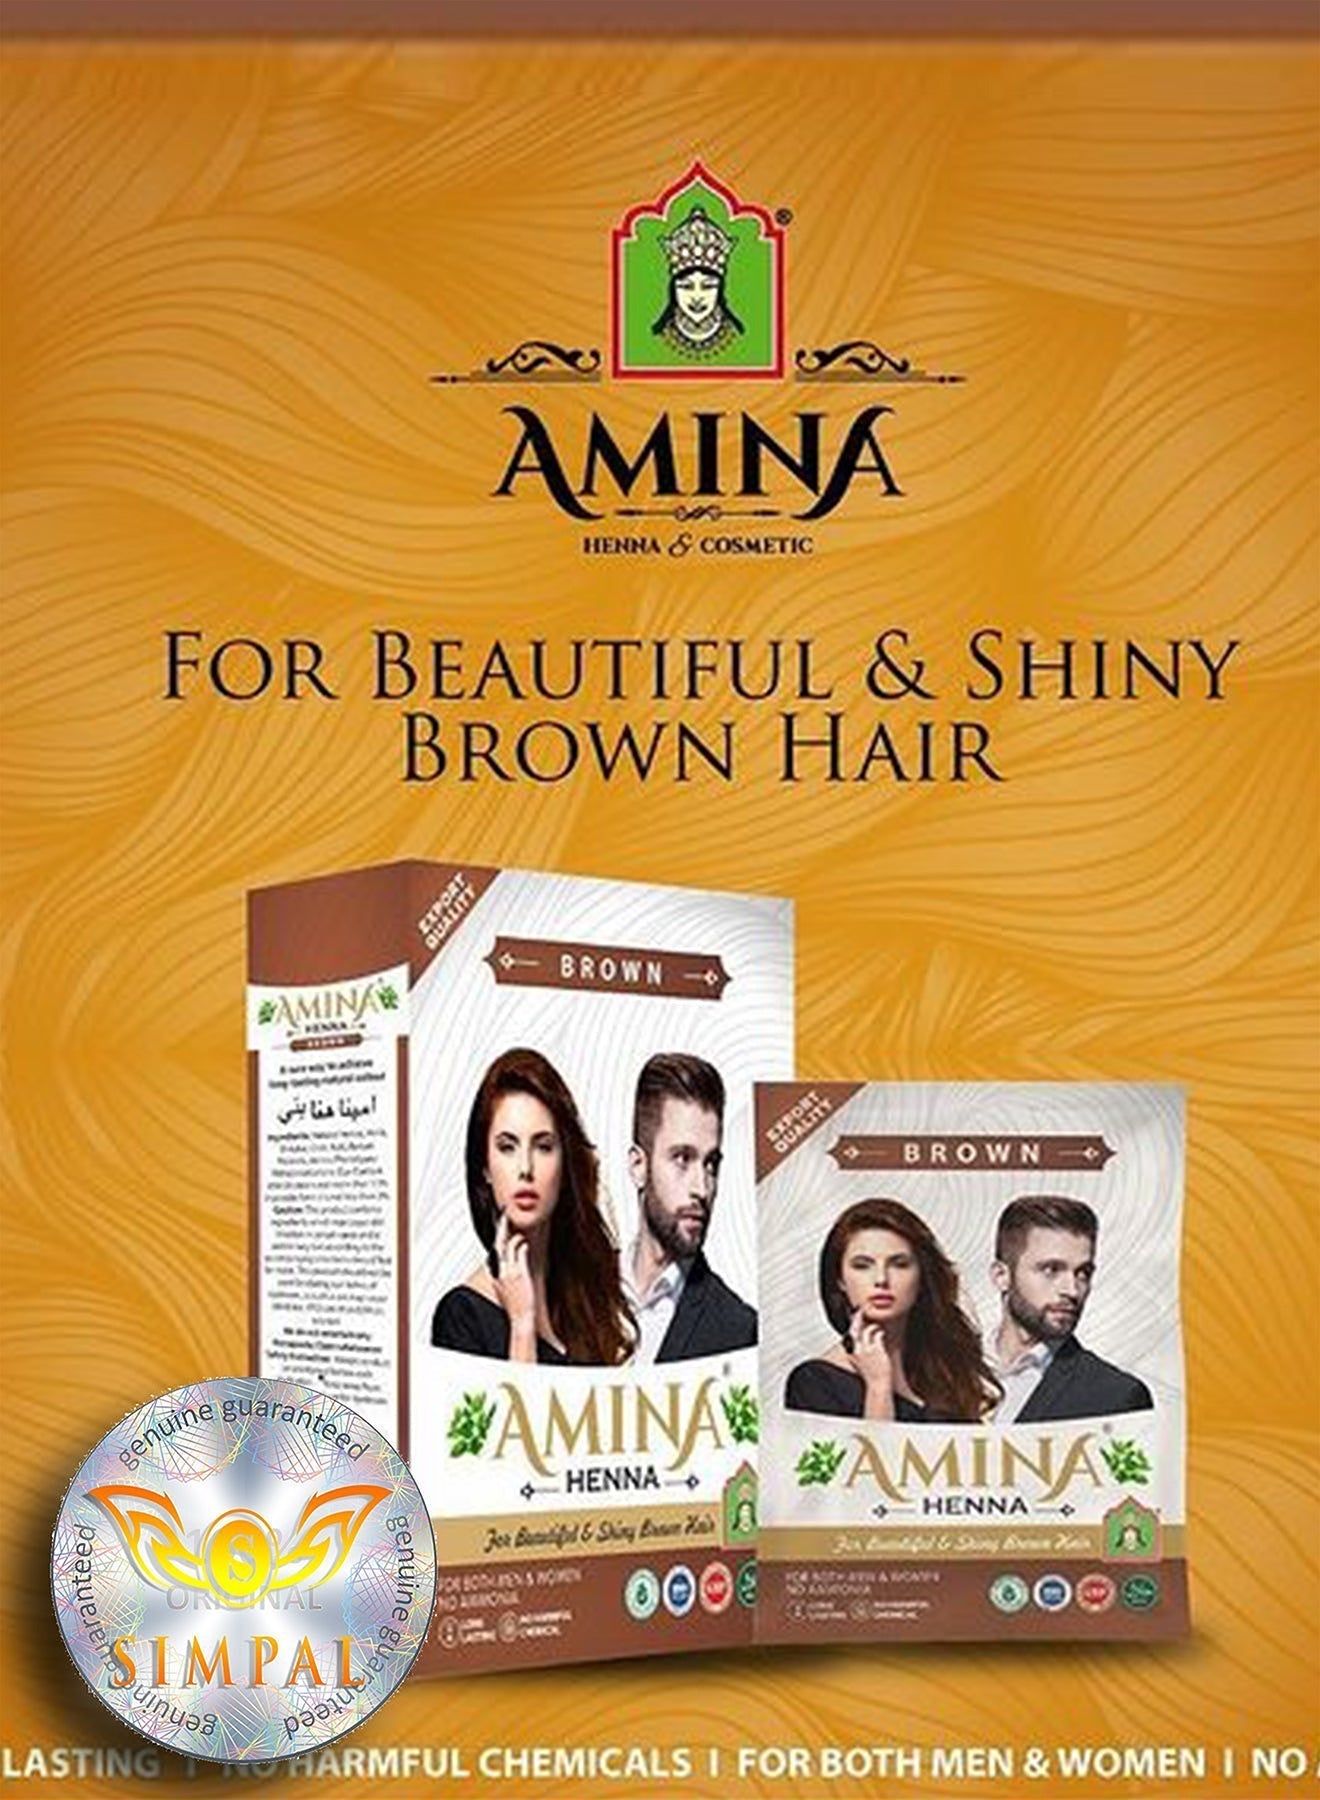 Amina Henna Natural Color Brown 10g x 6 pouch Value Pack of 3 